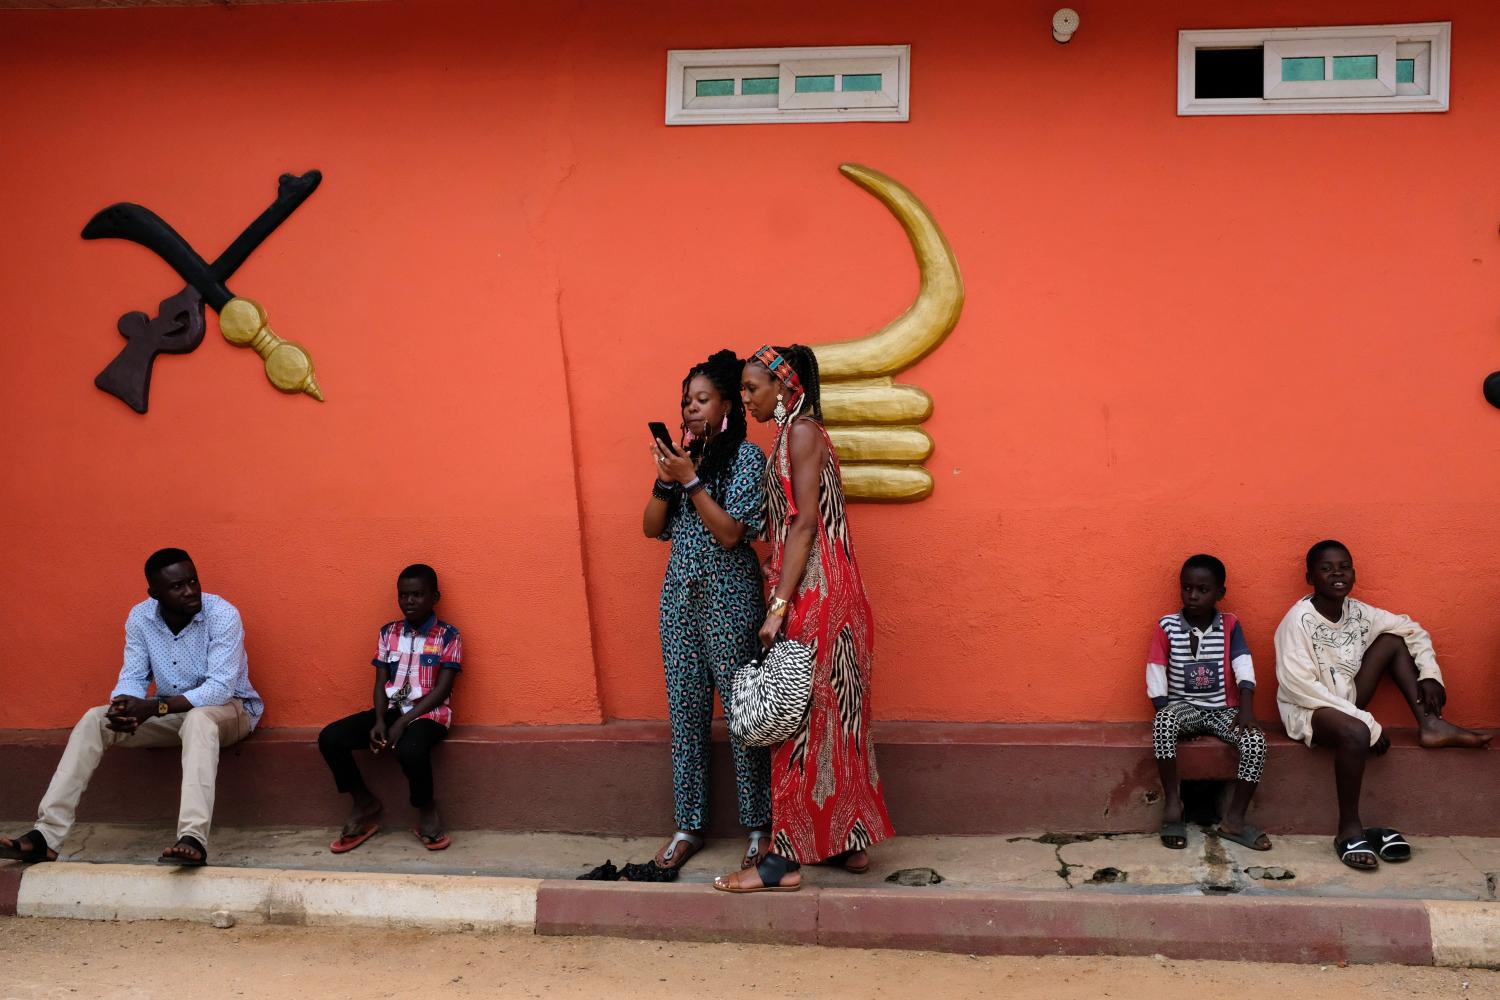 Members of a heritage tour group, who are traveling to Ghana to explore their ancestral roots, look at a mobile phone outside the palace of Nana Boakye Yam Ababio II, Chief of Nkwantakese, in Ashanti region, Ghana August 10, 2019. Picture taken August 10, 2019. REUTERS/Francis Kokoroko - RC1775814300